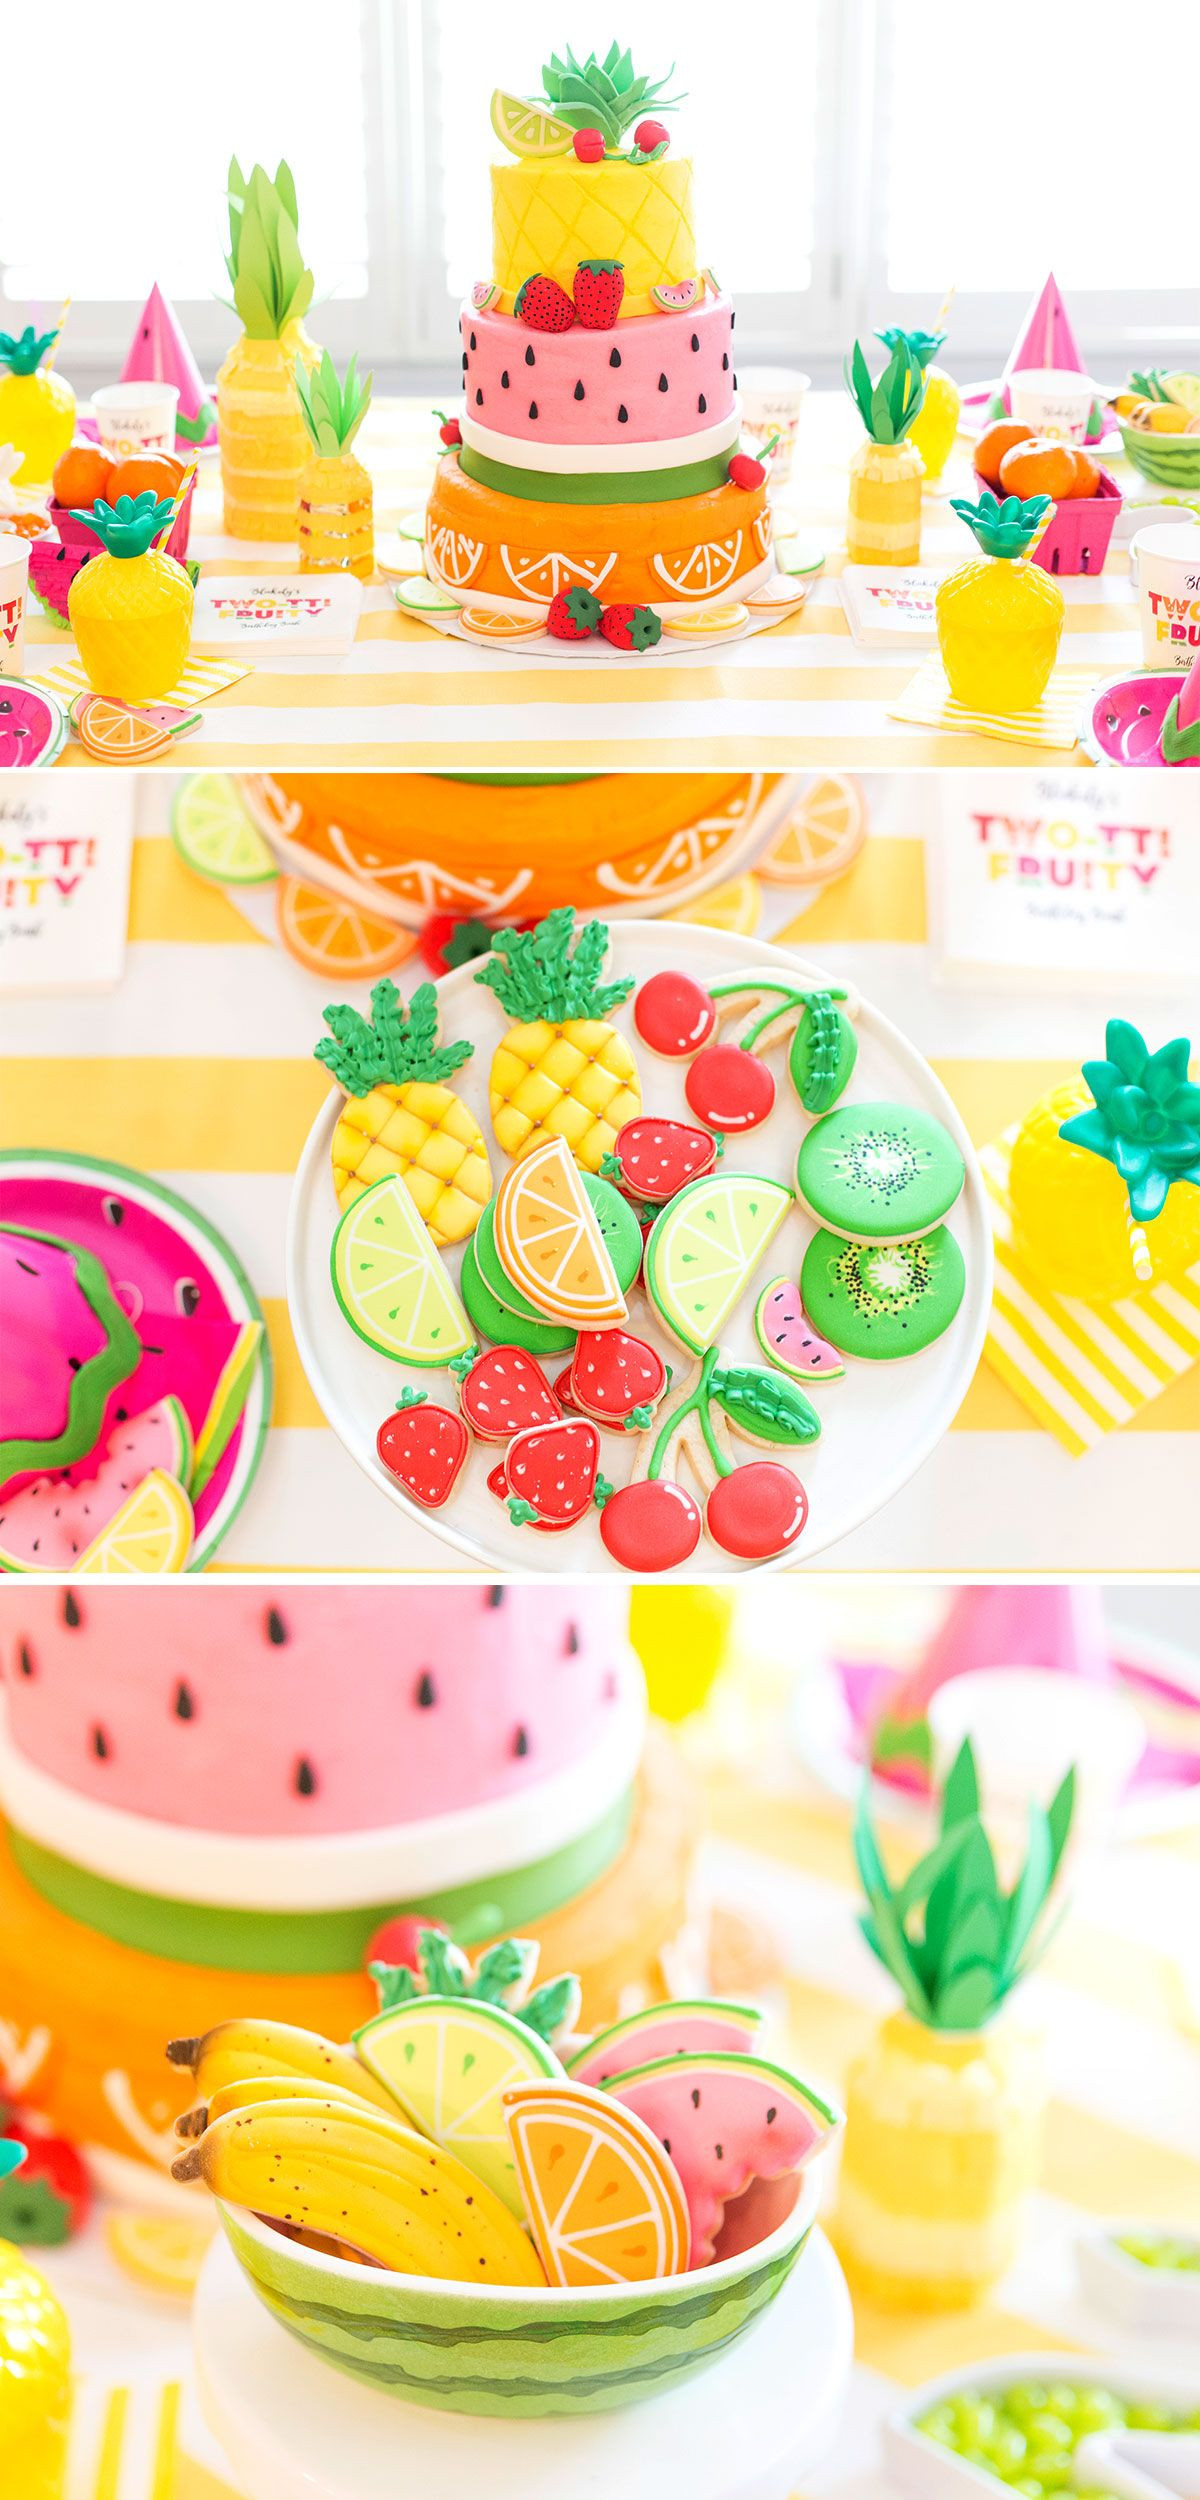 2 Year Old Birthday Party Ideas Summer
 Two tti Fruity Birthday Party Blakely Turns 2